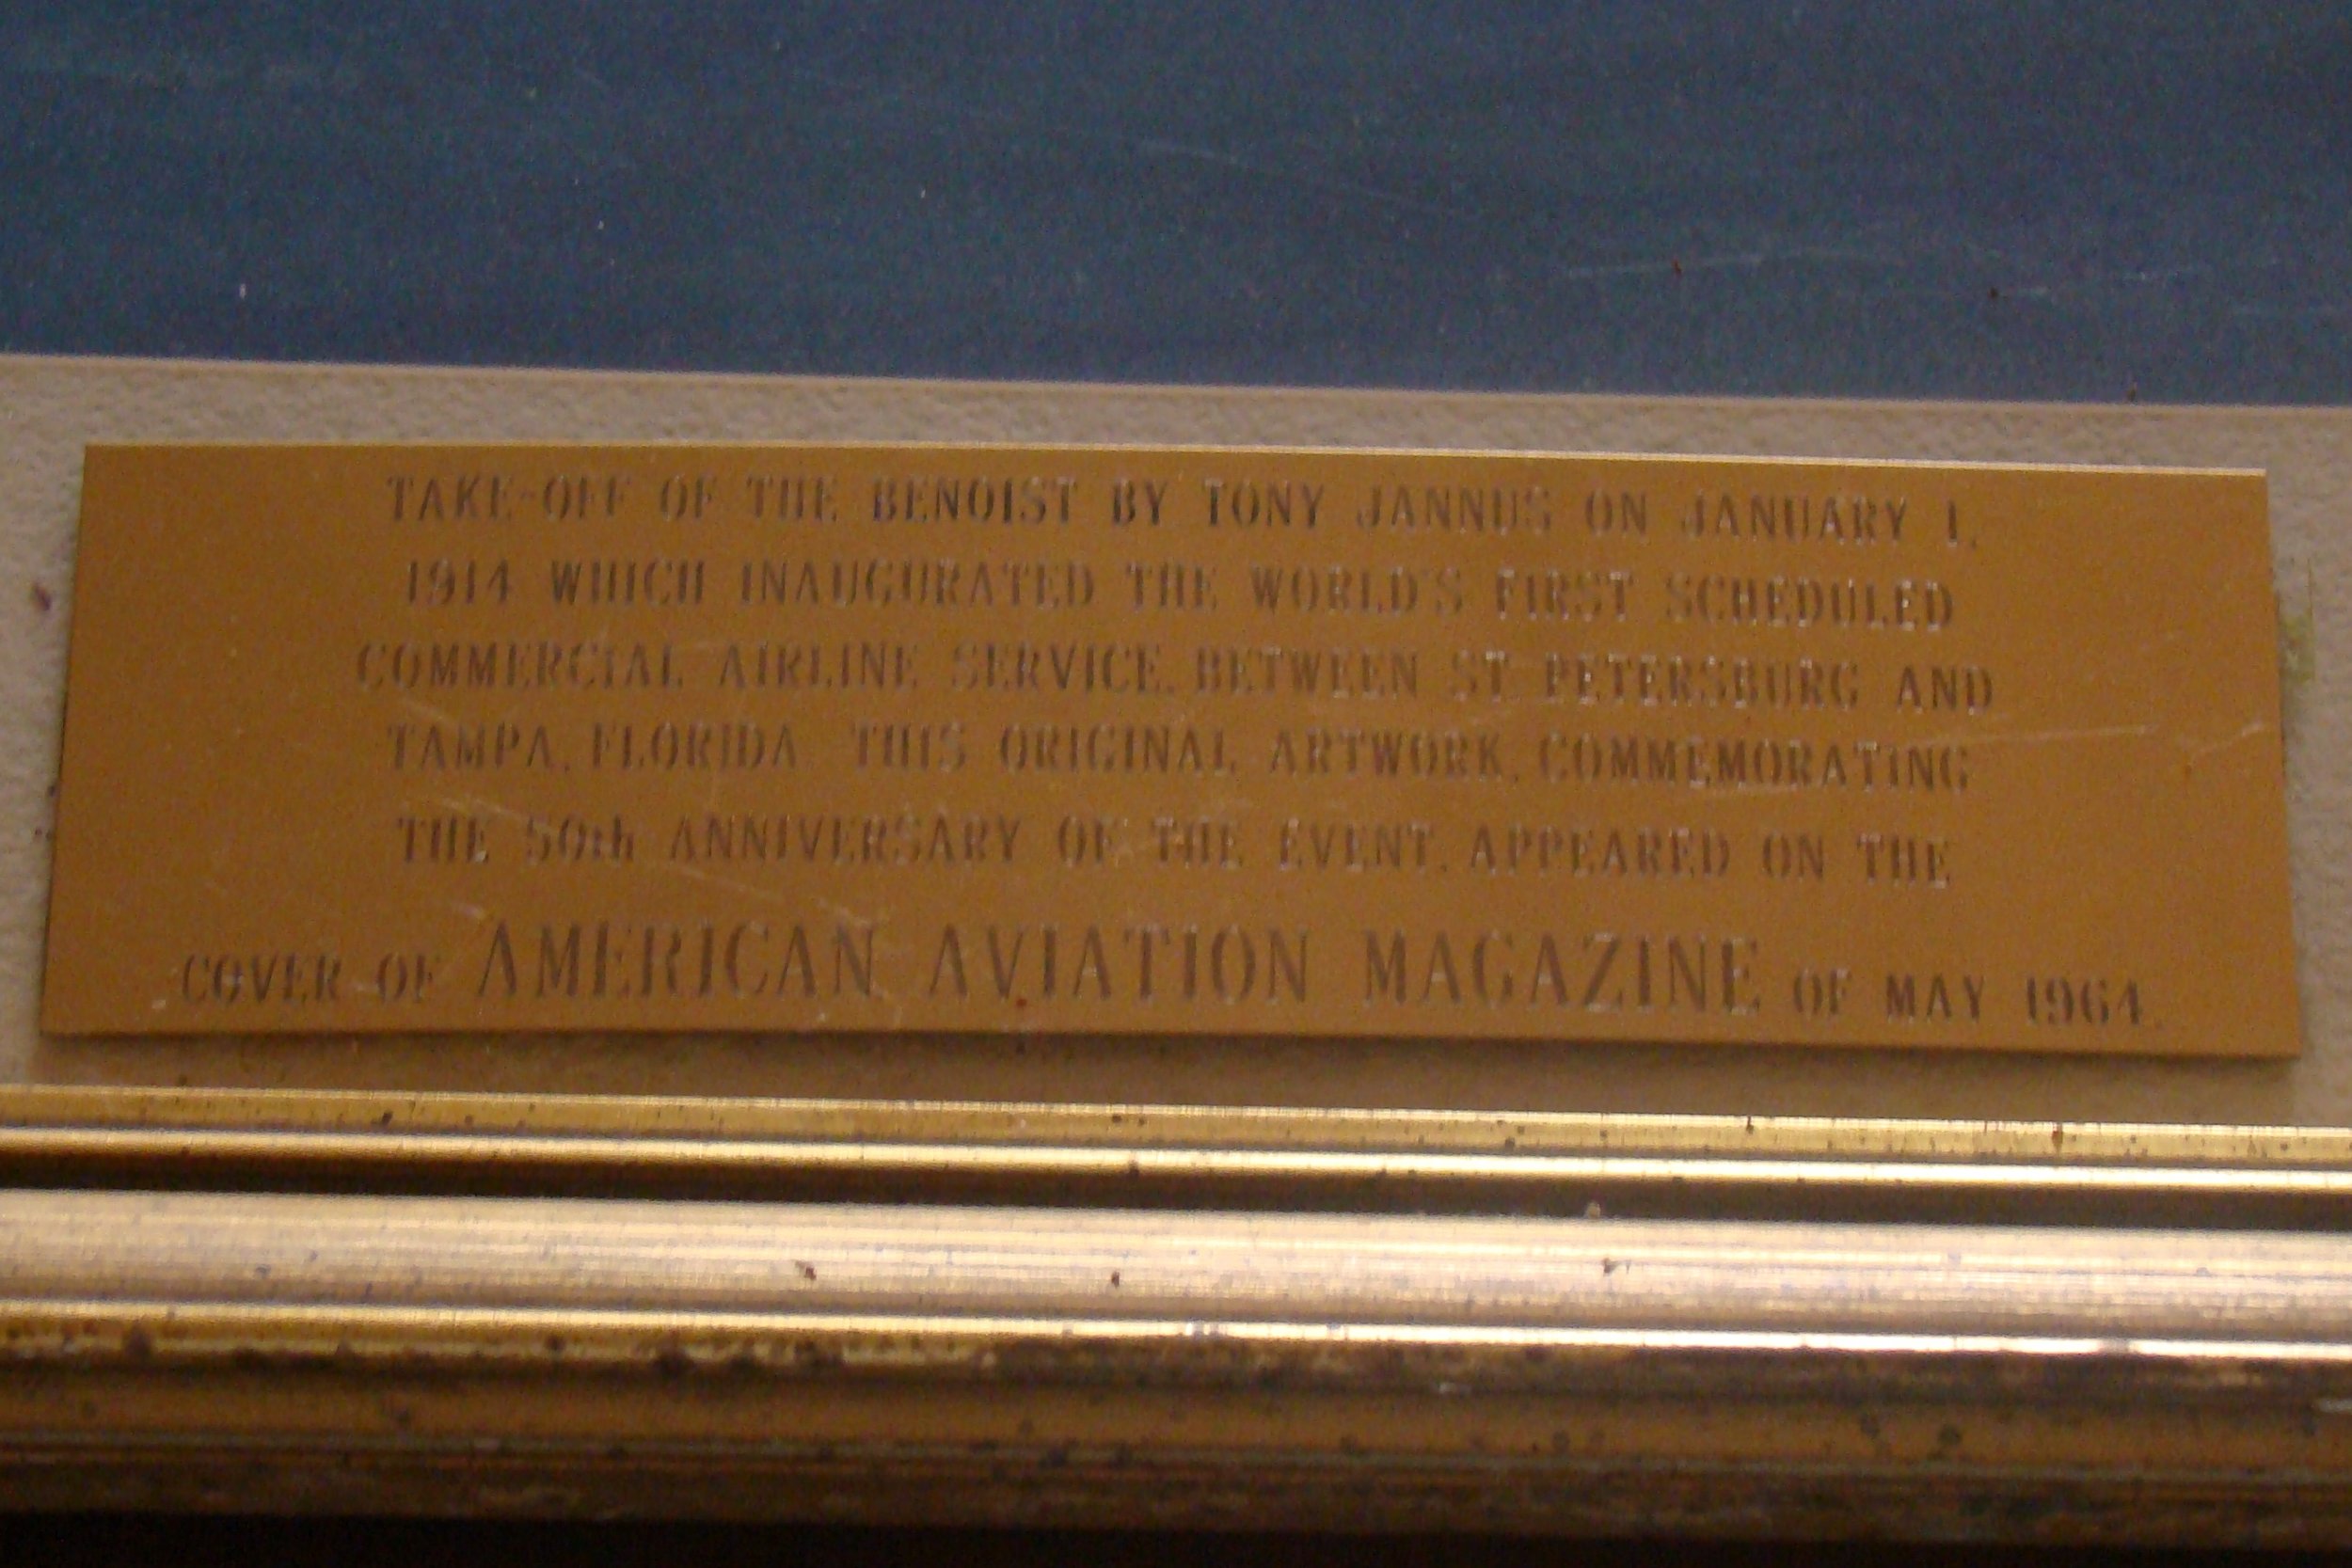 Krusen Picture, Brass Plate on Benoist,Cover of American Aviation Magazine, May 1964.JPG